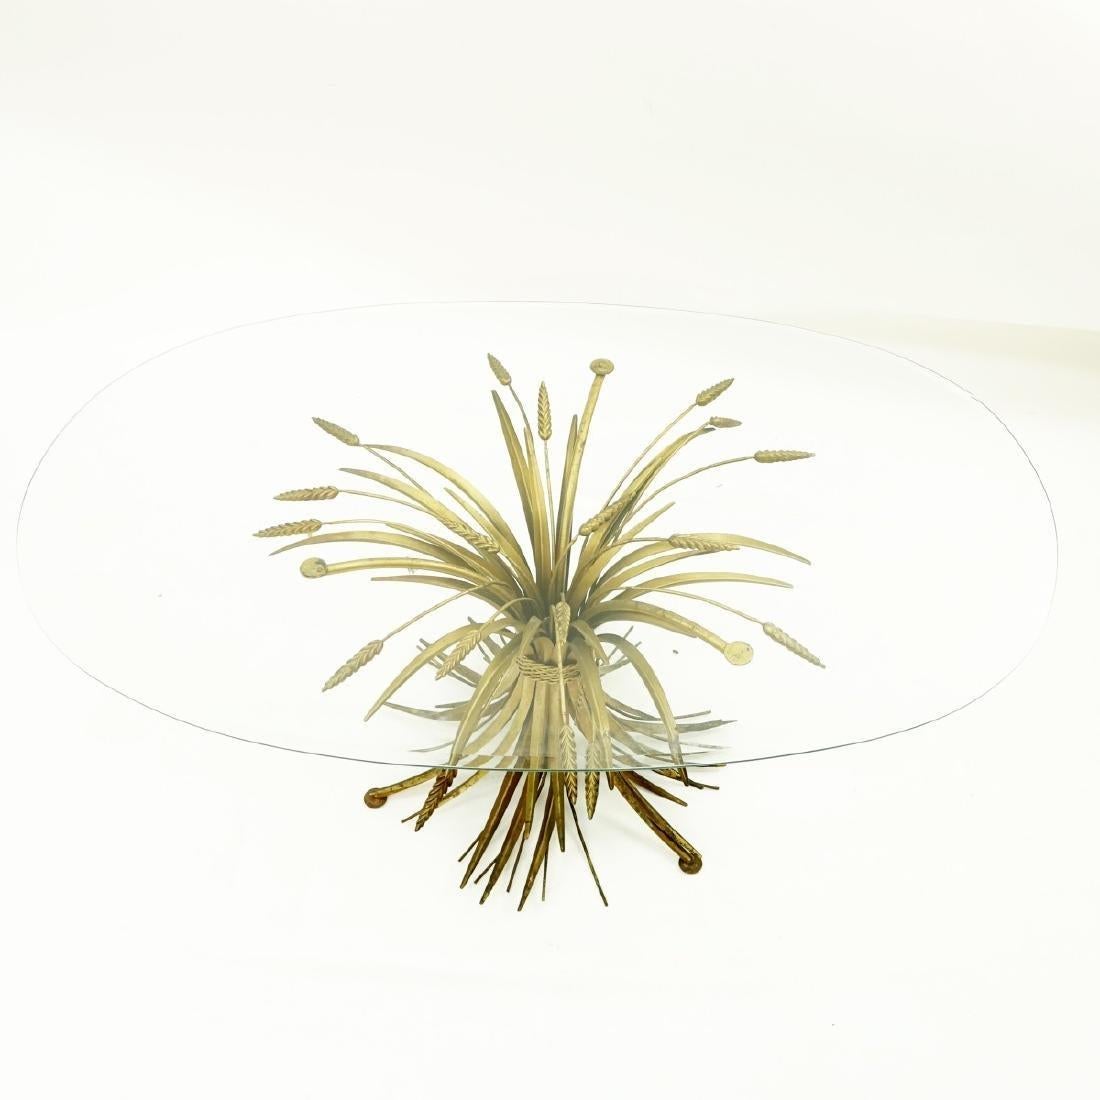 1970s Coco Chanel Sheaf of Wheat Gilt Oval Glass and brass table France Beautiful Hollywood Regency Modern gold French sculptural sheaf of wheat, ( Le Blé) coffee or side table. In the style of Baguès or Robert Goossens. This highly coveted